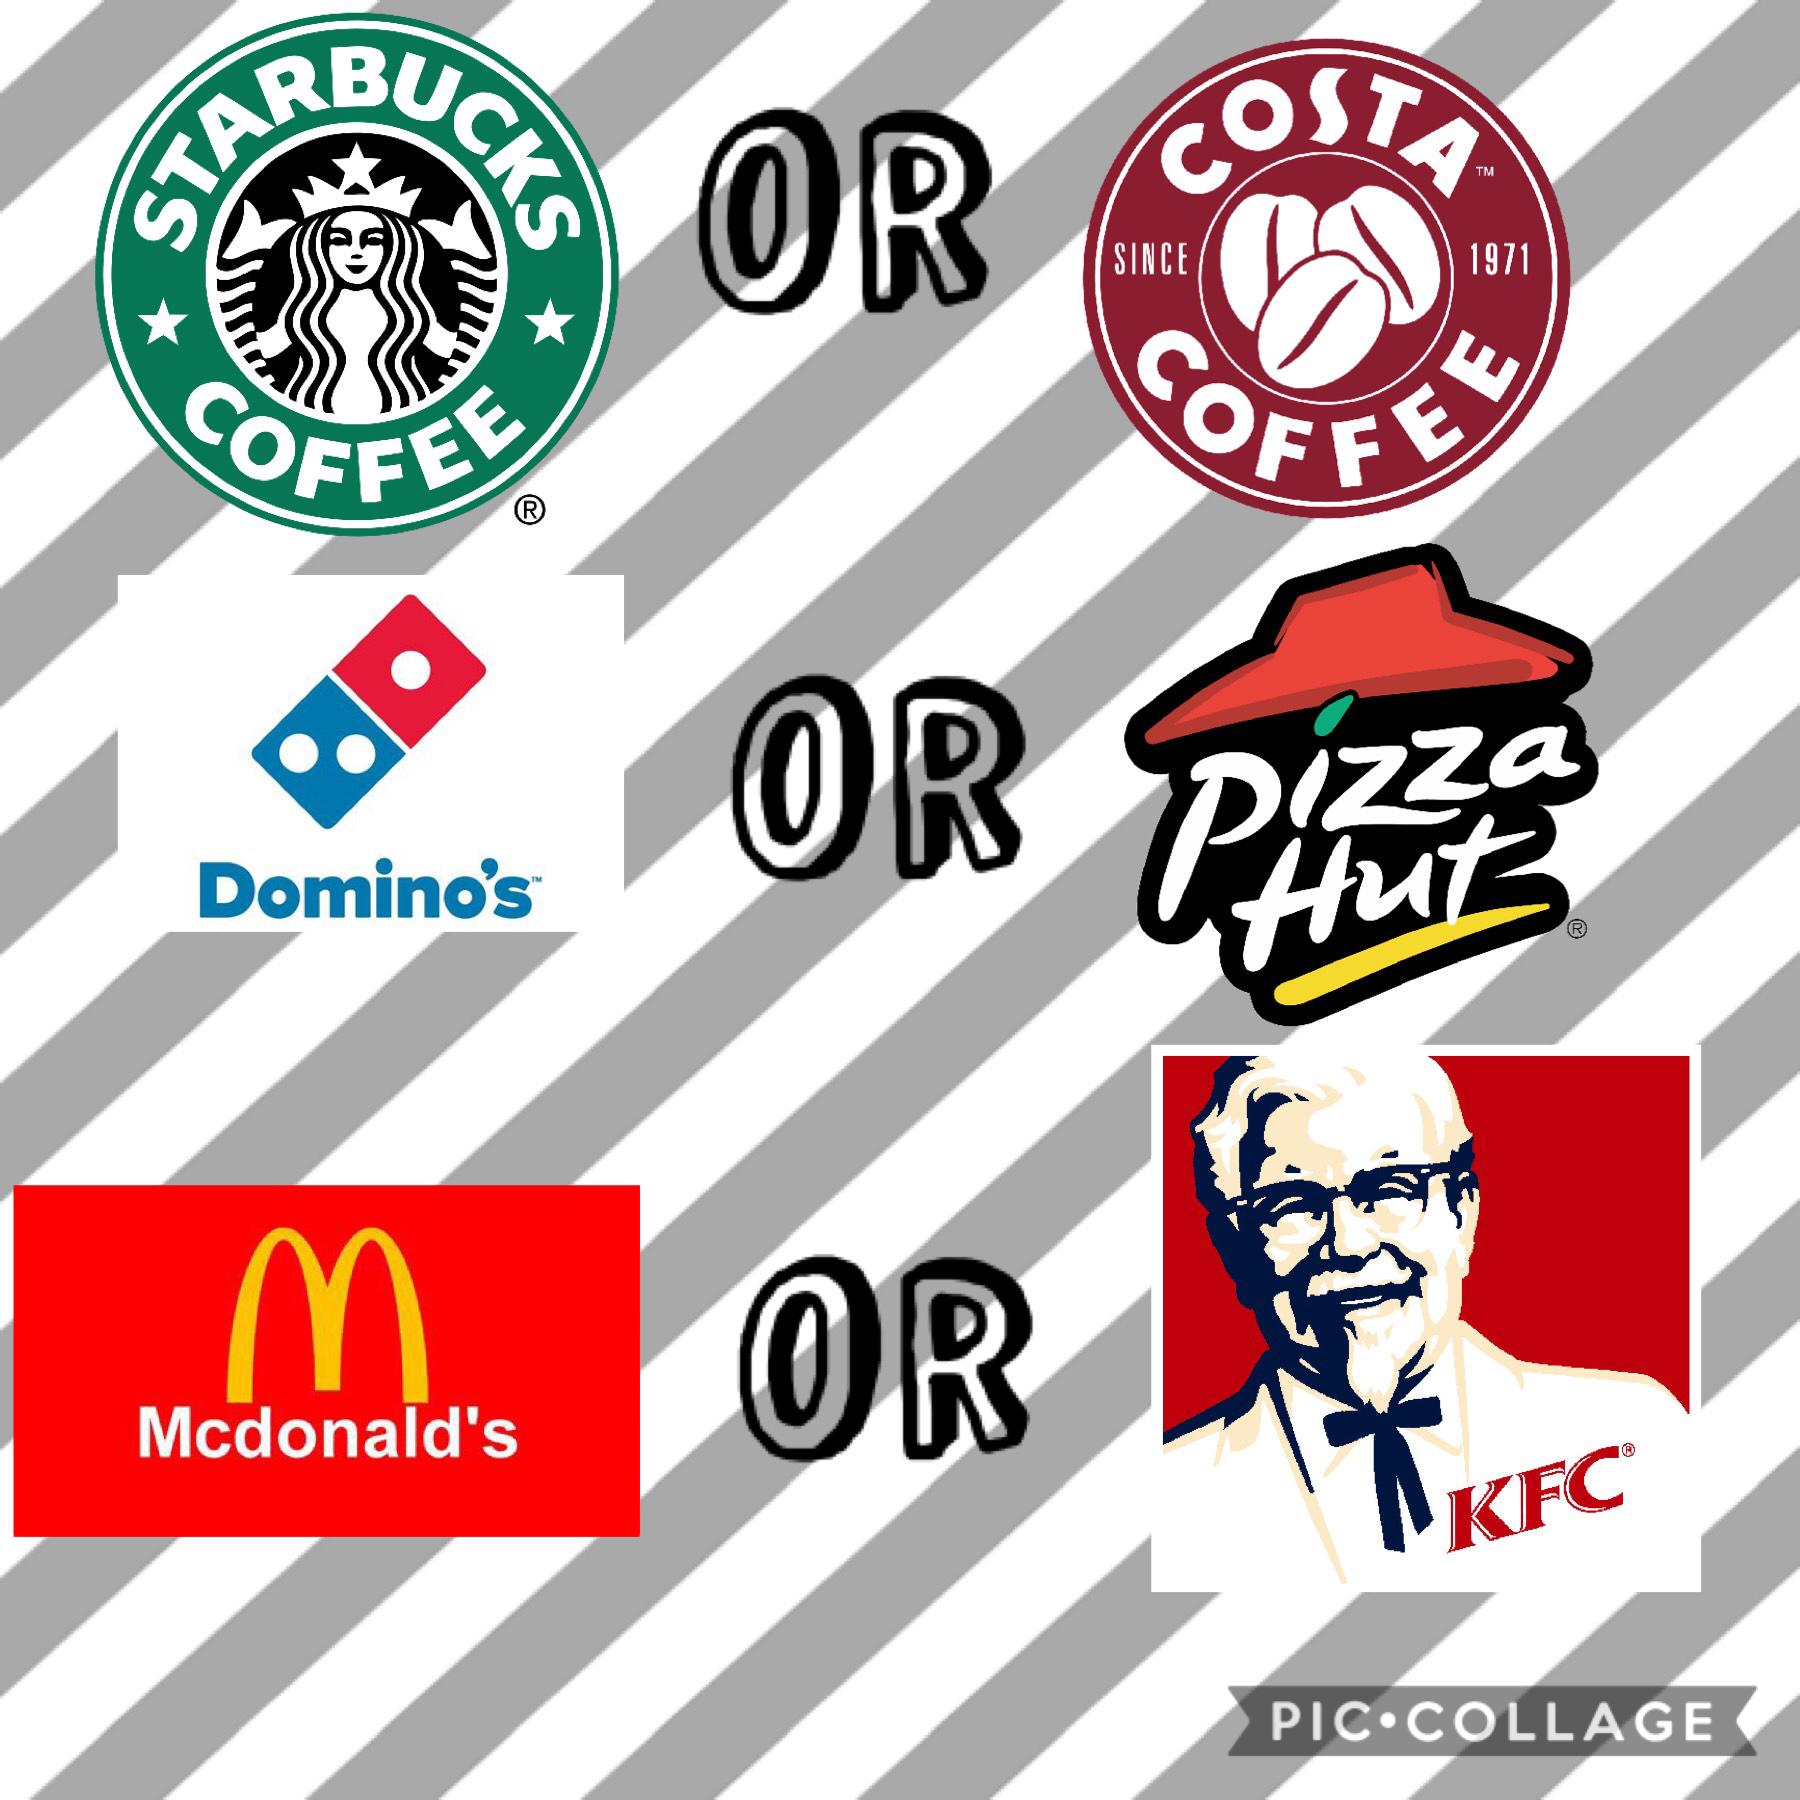 Starbucks or Costa?
Dominos or Pizza Hut?
McDonalds or KFC?
Comment your Answers!